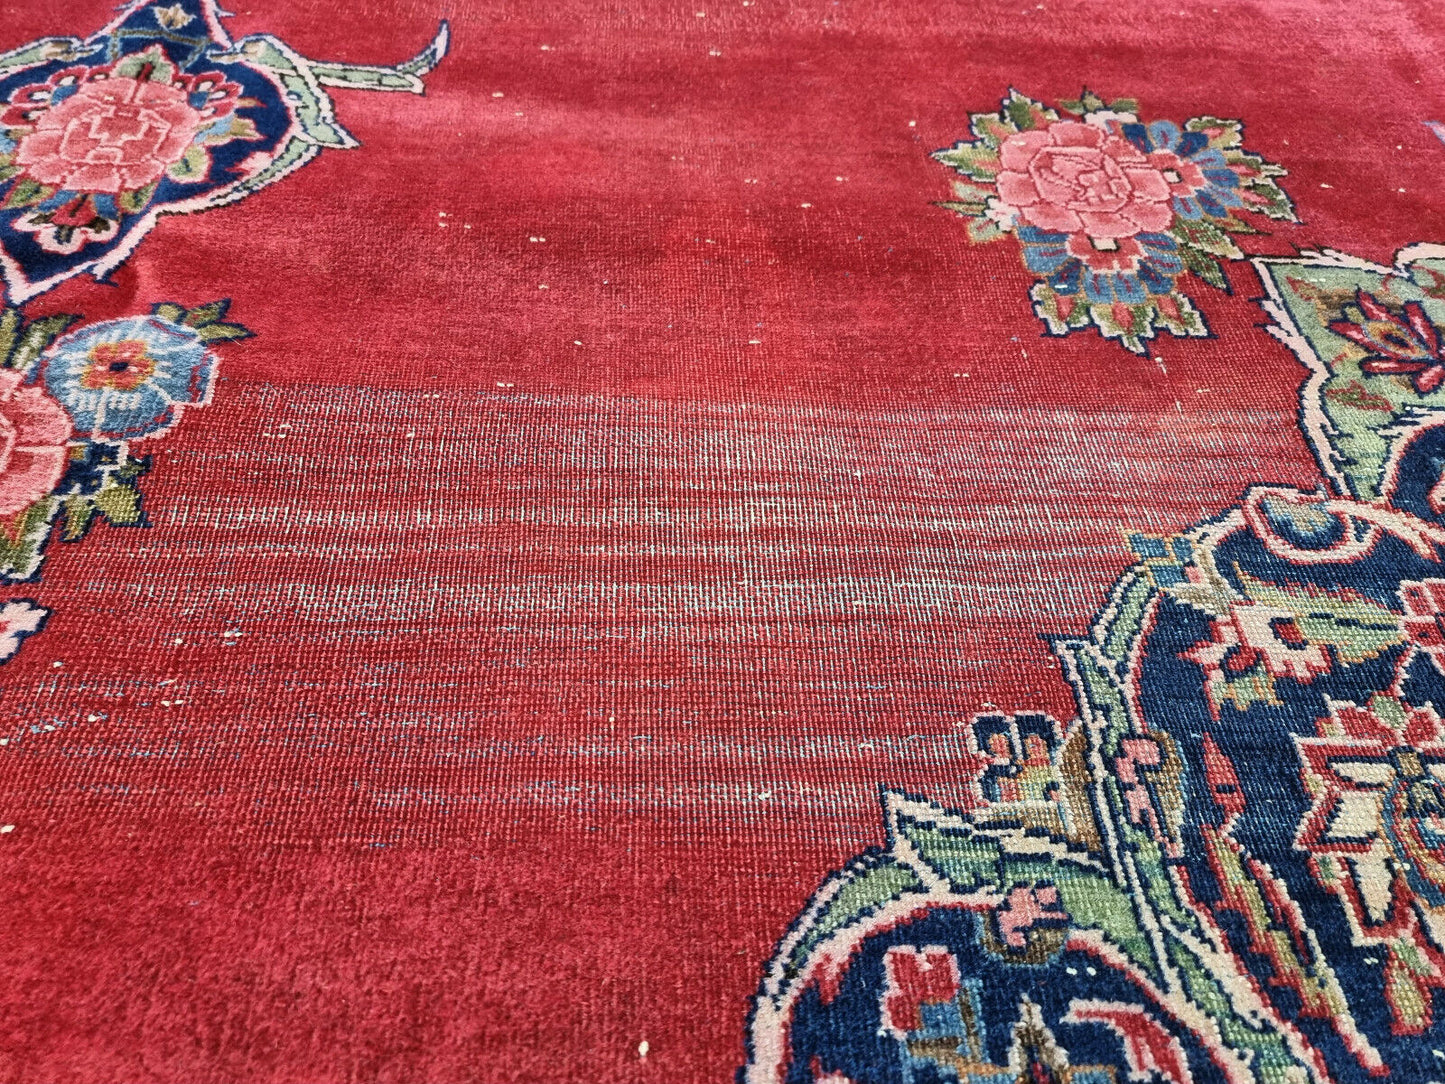 Texture Close-up of Distressed Finish on Handmade Antique Persian Kashan Rug - 1920s